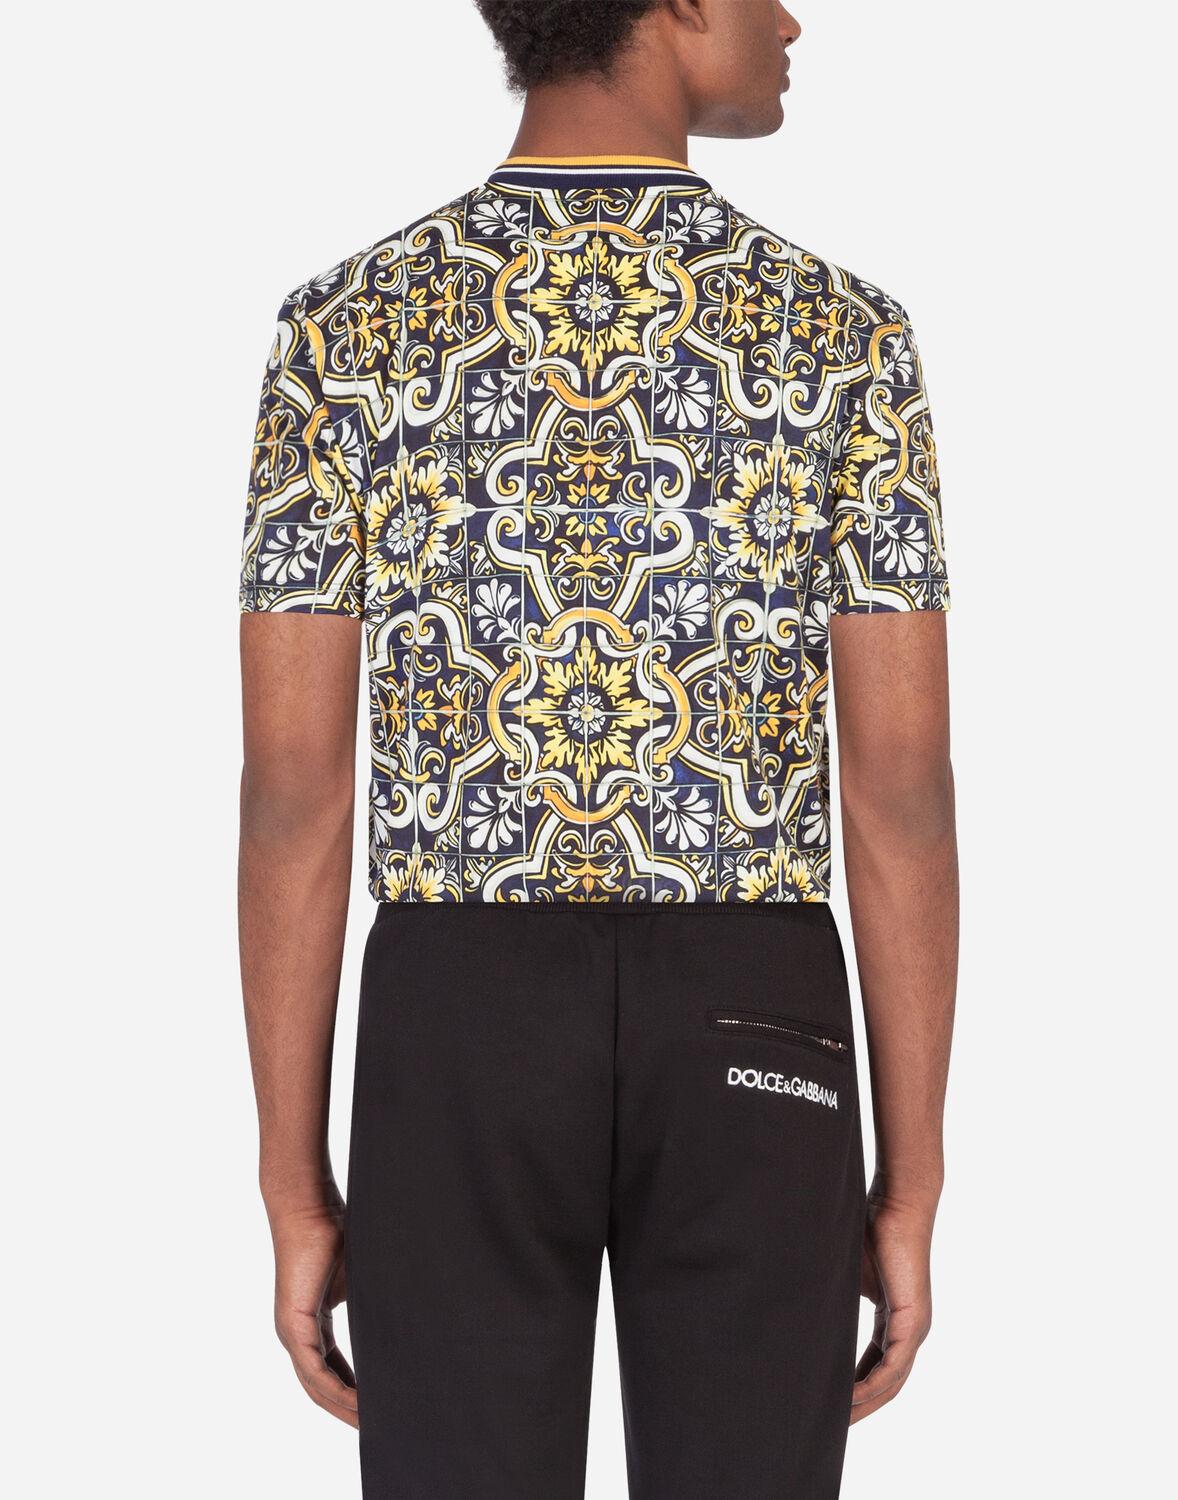 Dolce & Gabbana Cotton T-shirt With Maiolica Print for Men - Lyst